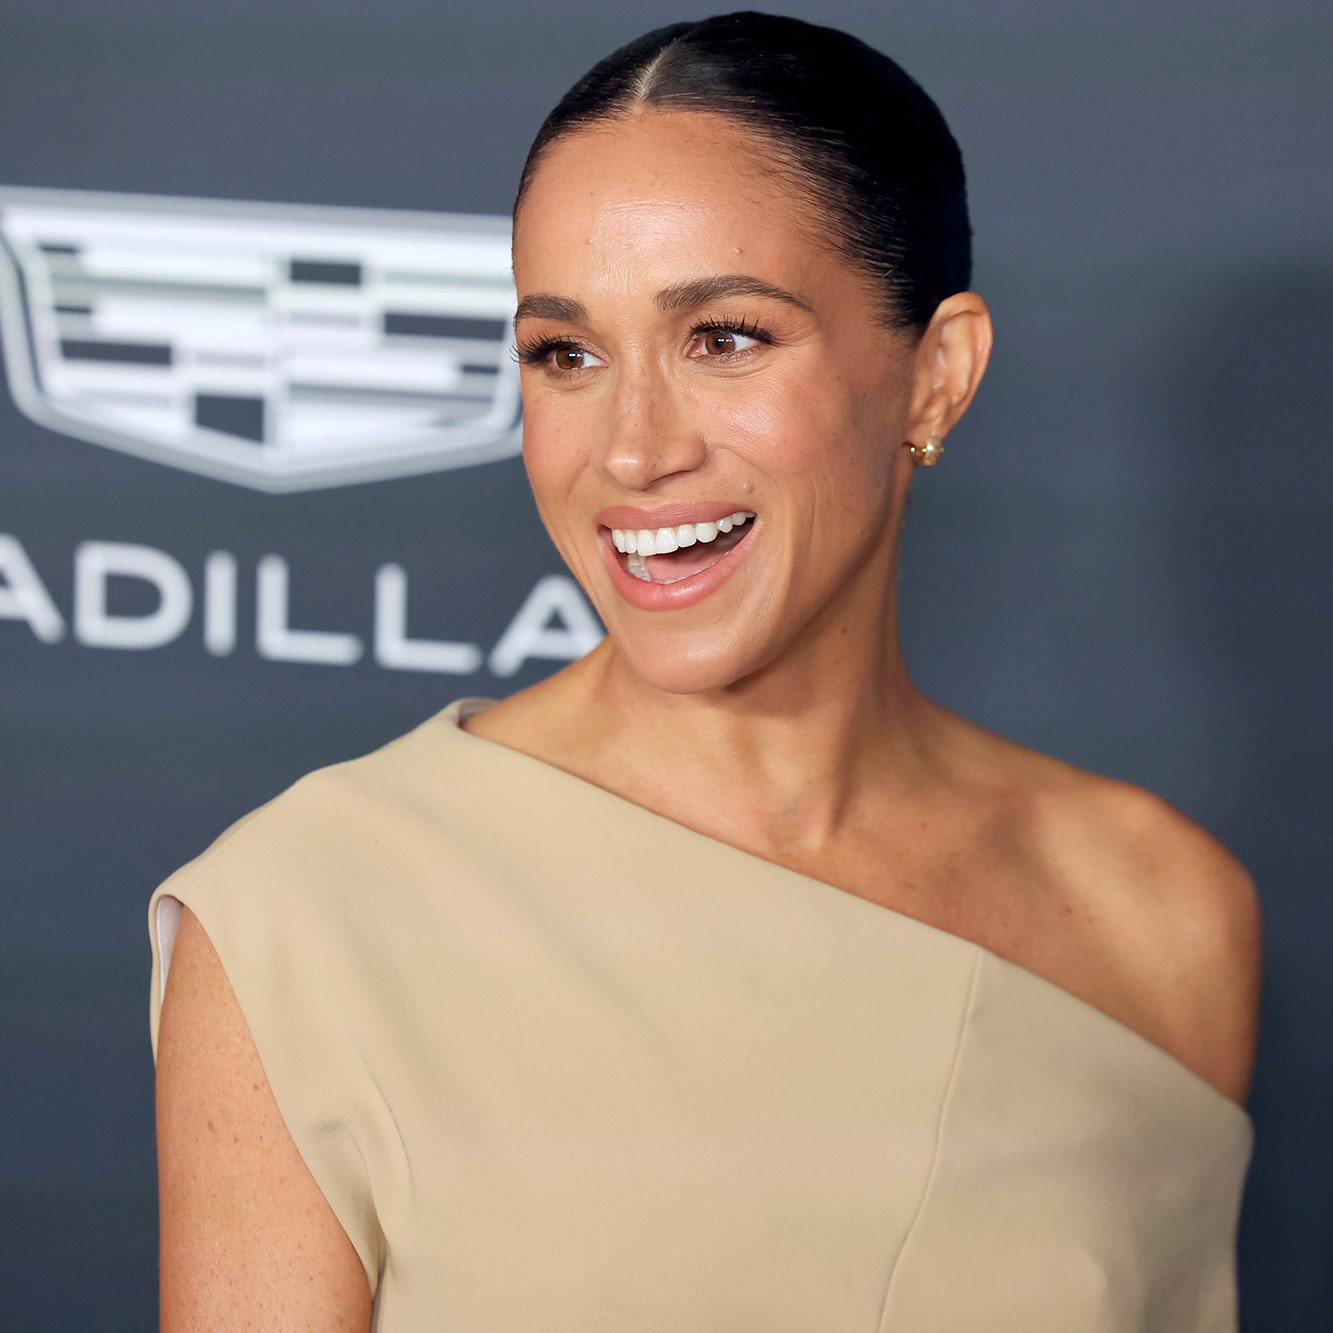 Meghan Markle Makes an Appearance at a Netflix Event For Friends Misan Harriman and David Oyelowo